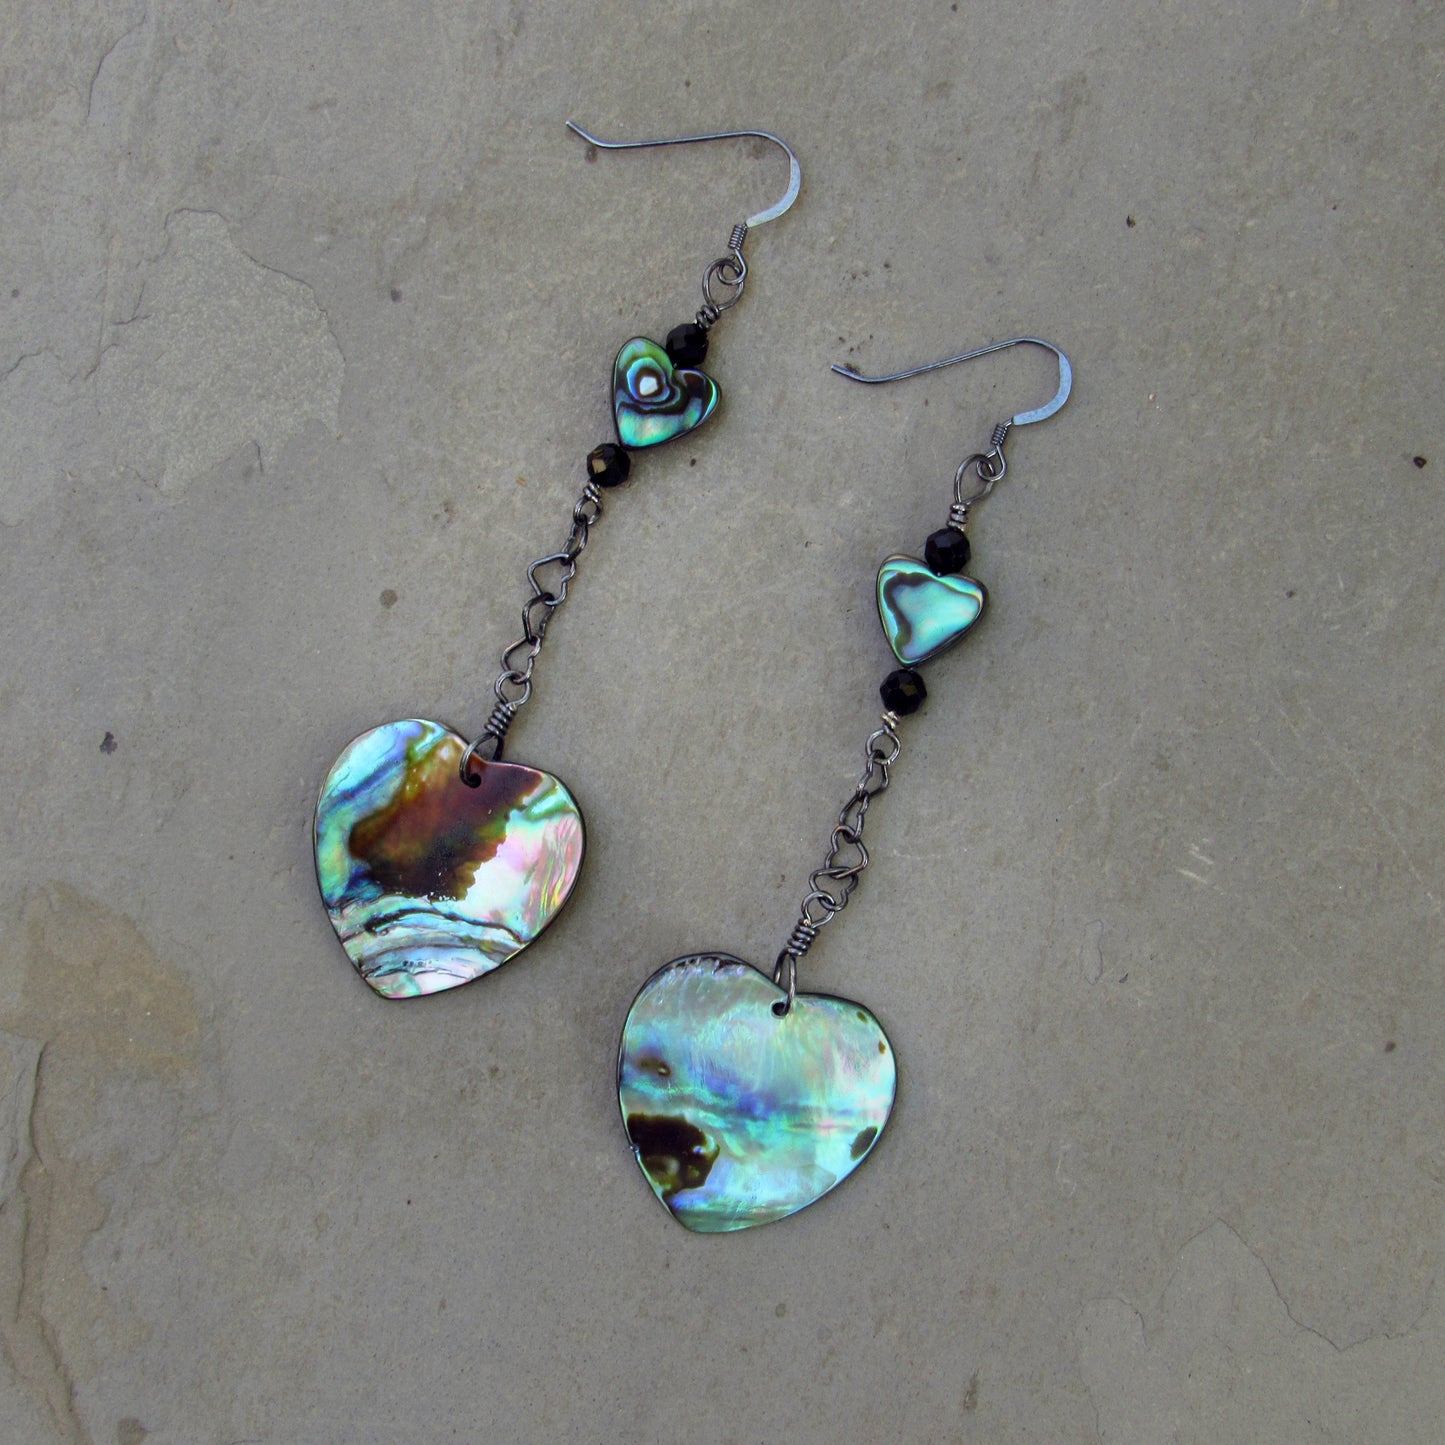 Abalone Hearts, Black Spinel gemstones, and Oxidized Sterling Silver Drop Earrings